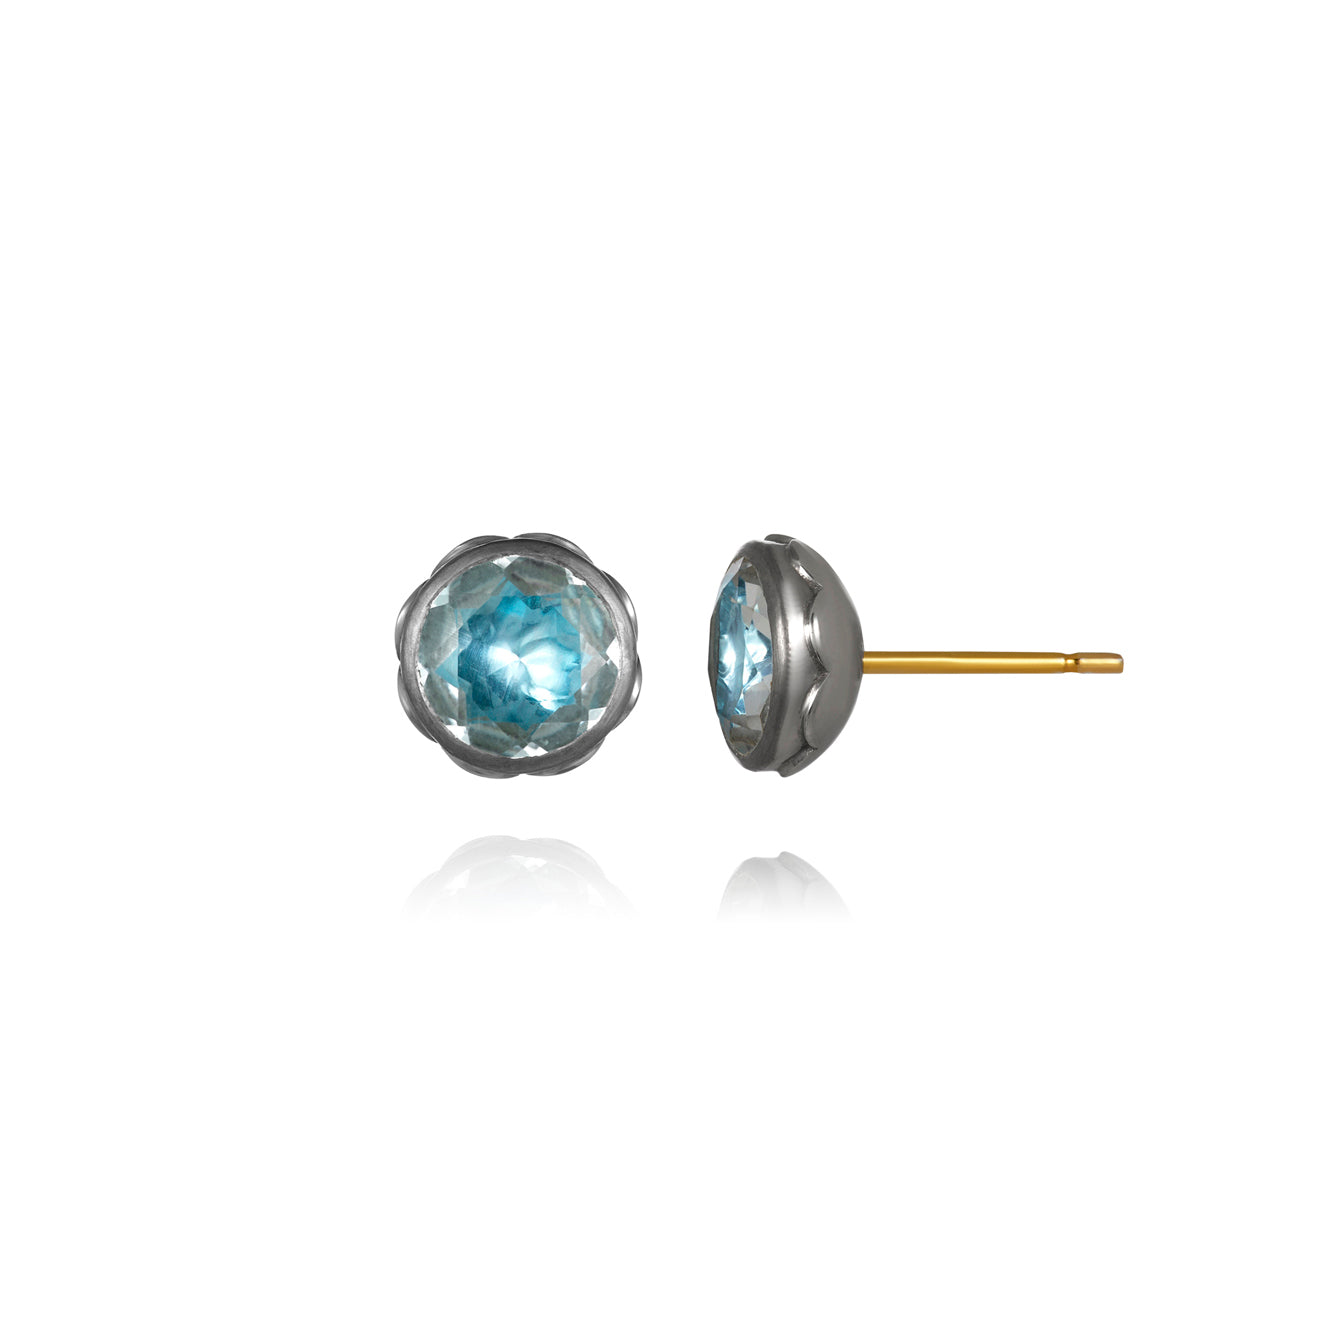 Catherine Round Stud Earrings (Black Rhodium or Yellow Gold Wash)